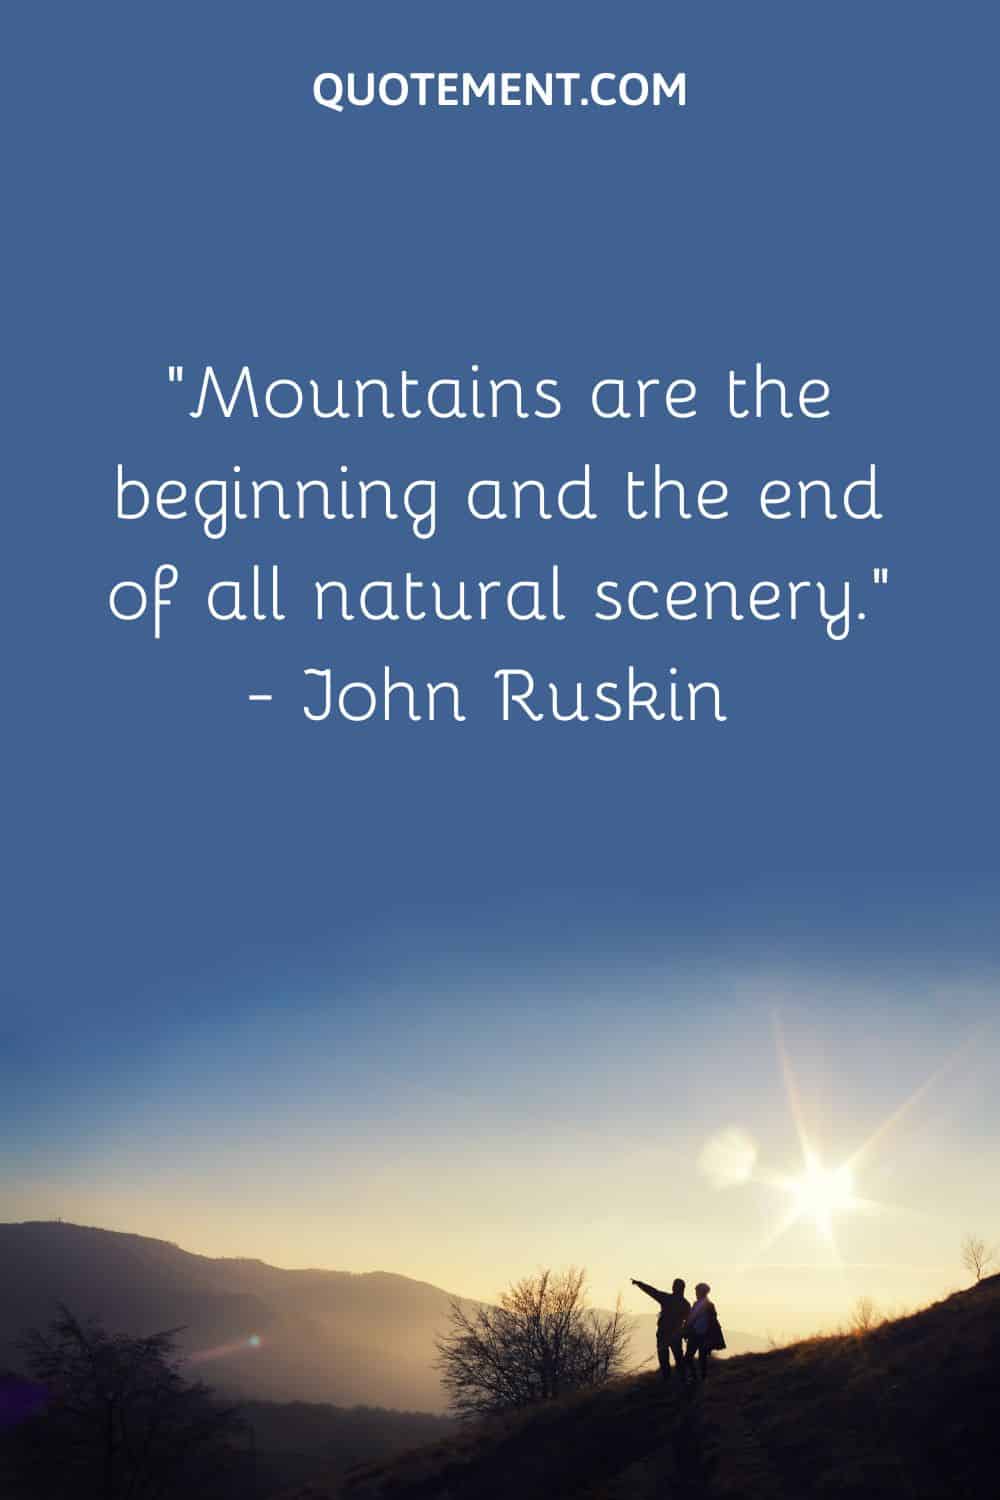 “Mountains are the beginning and the end of all natural scenery.” — John Ruskin